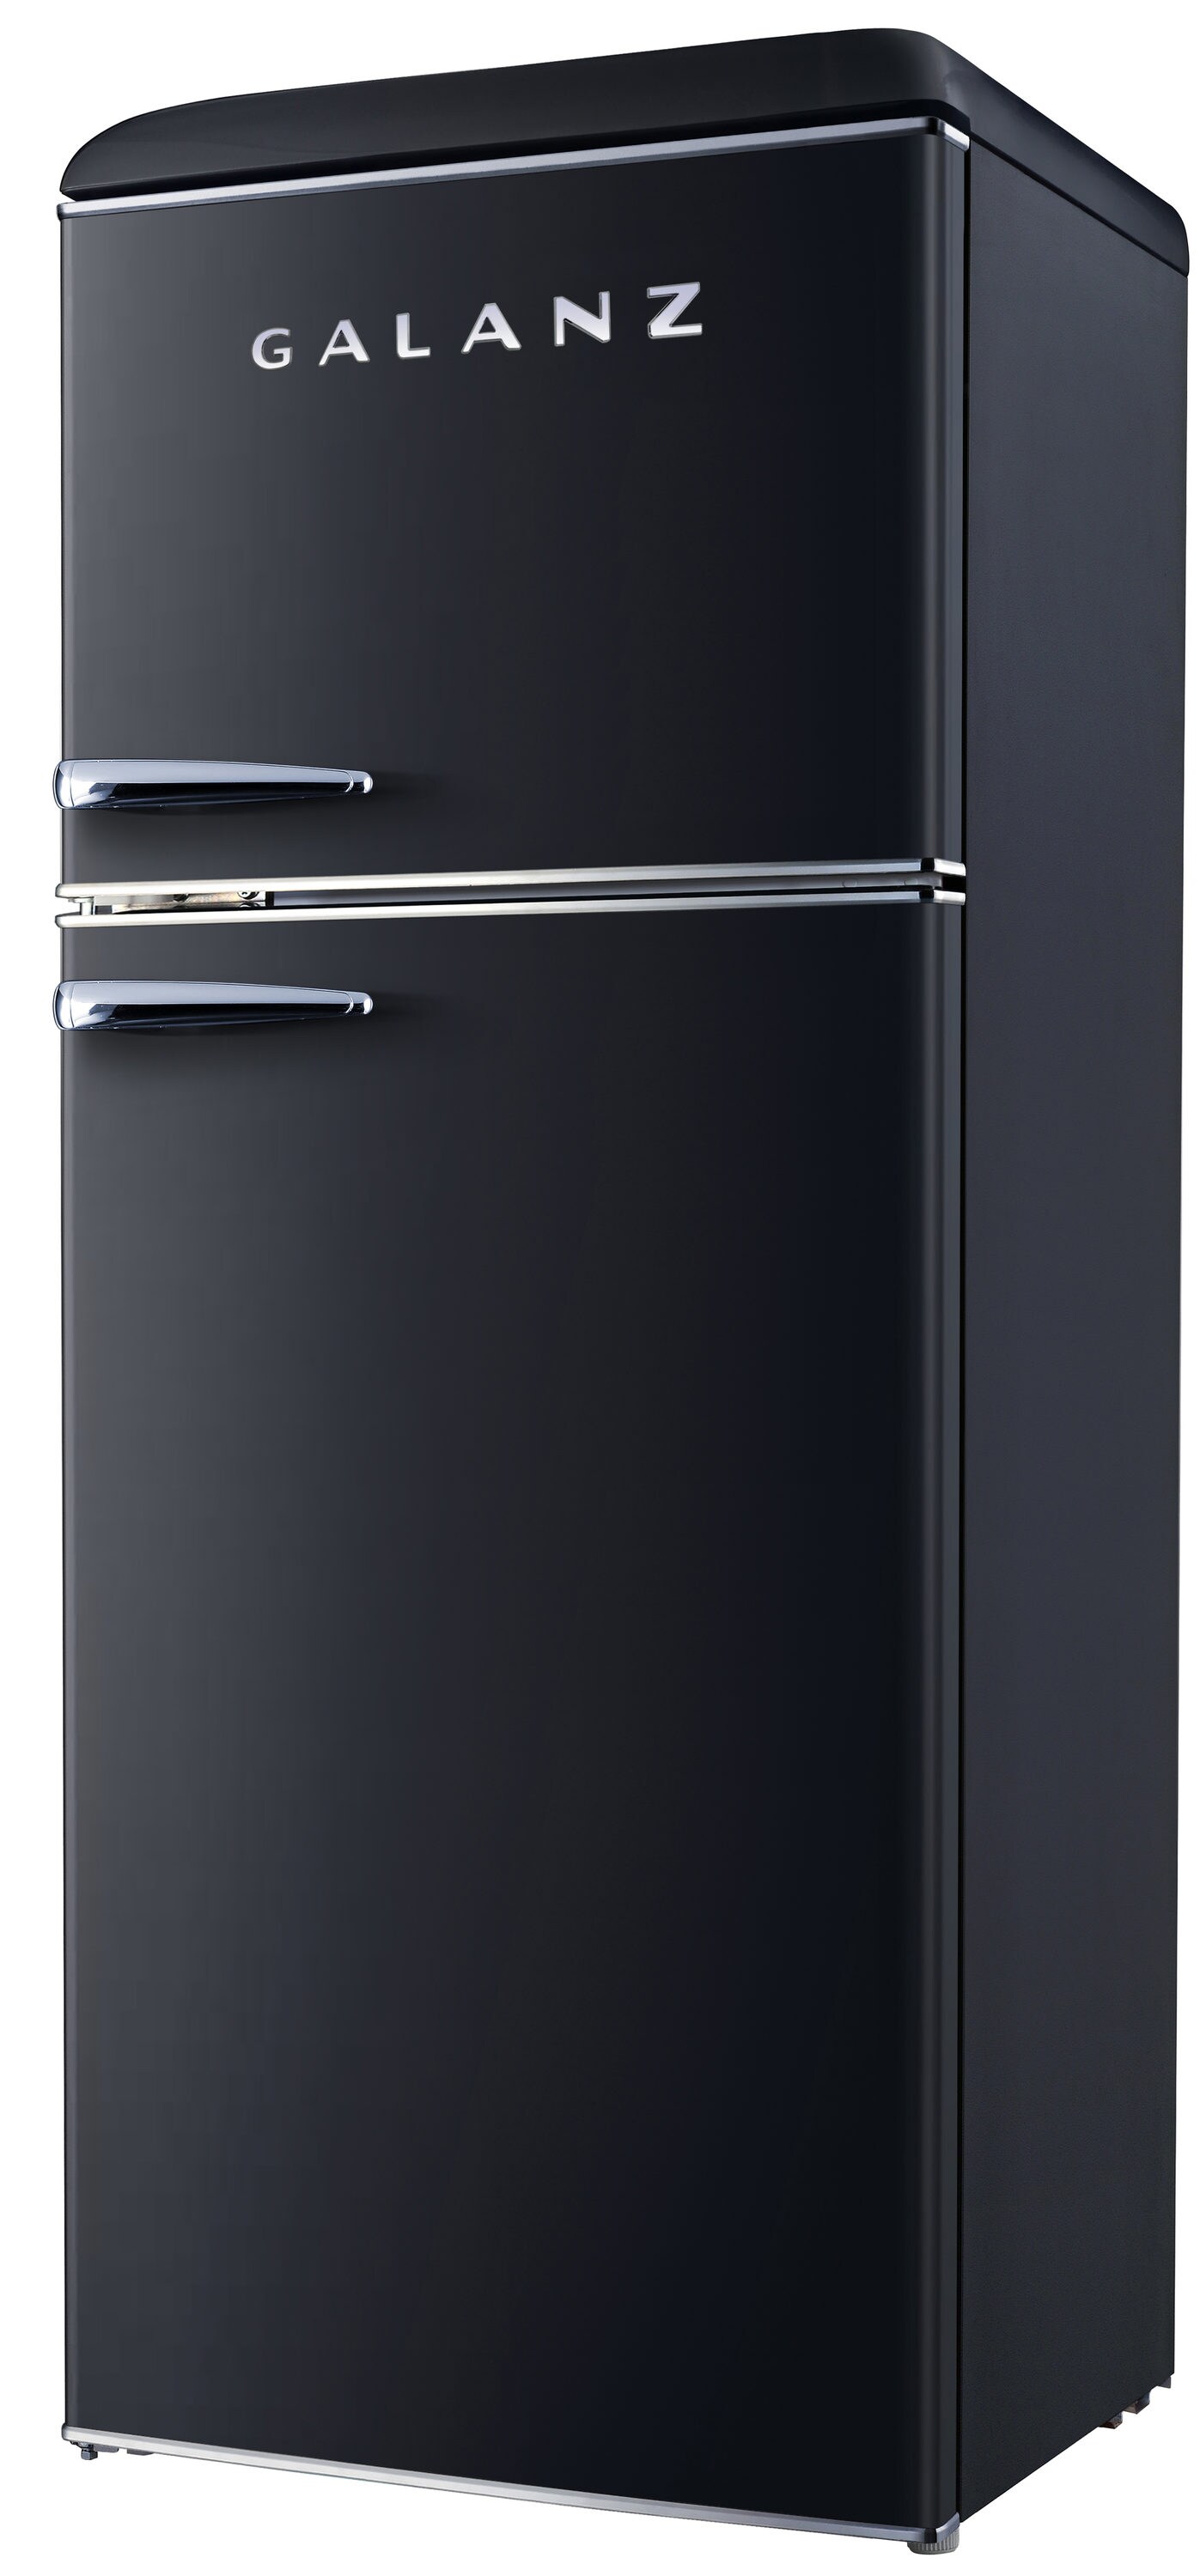 Galanz GLR16FS2D08 Refrigerator Review - Consumer Reports